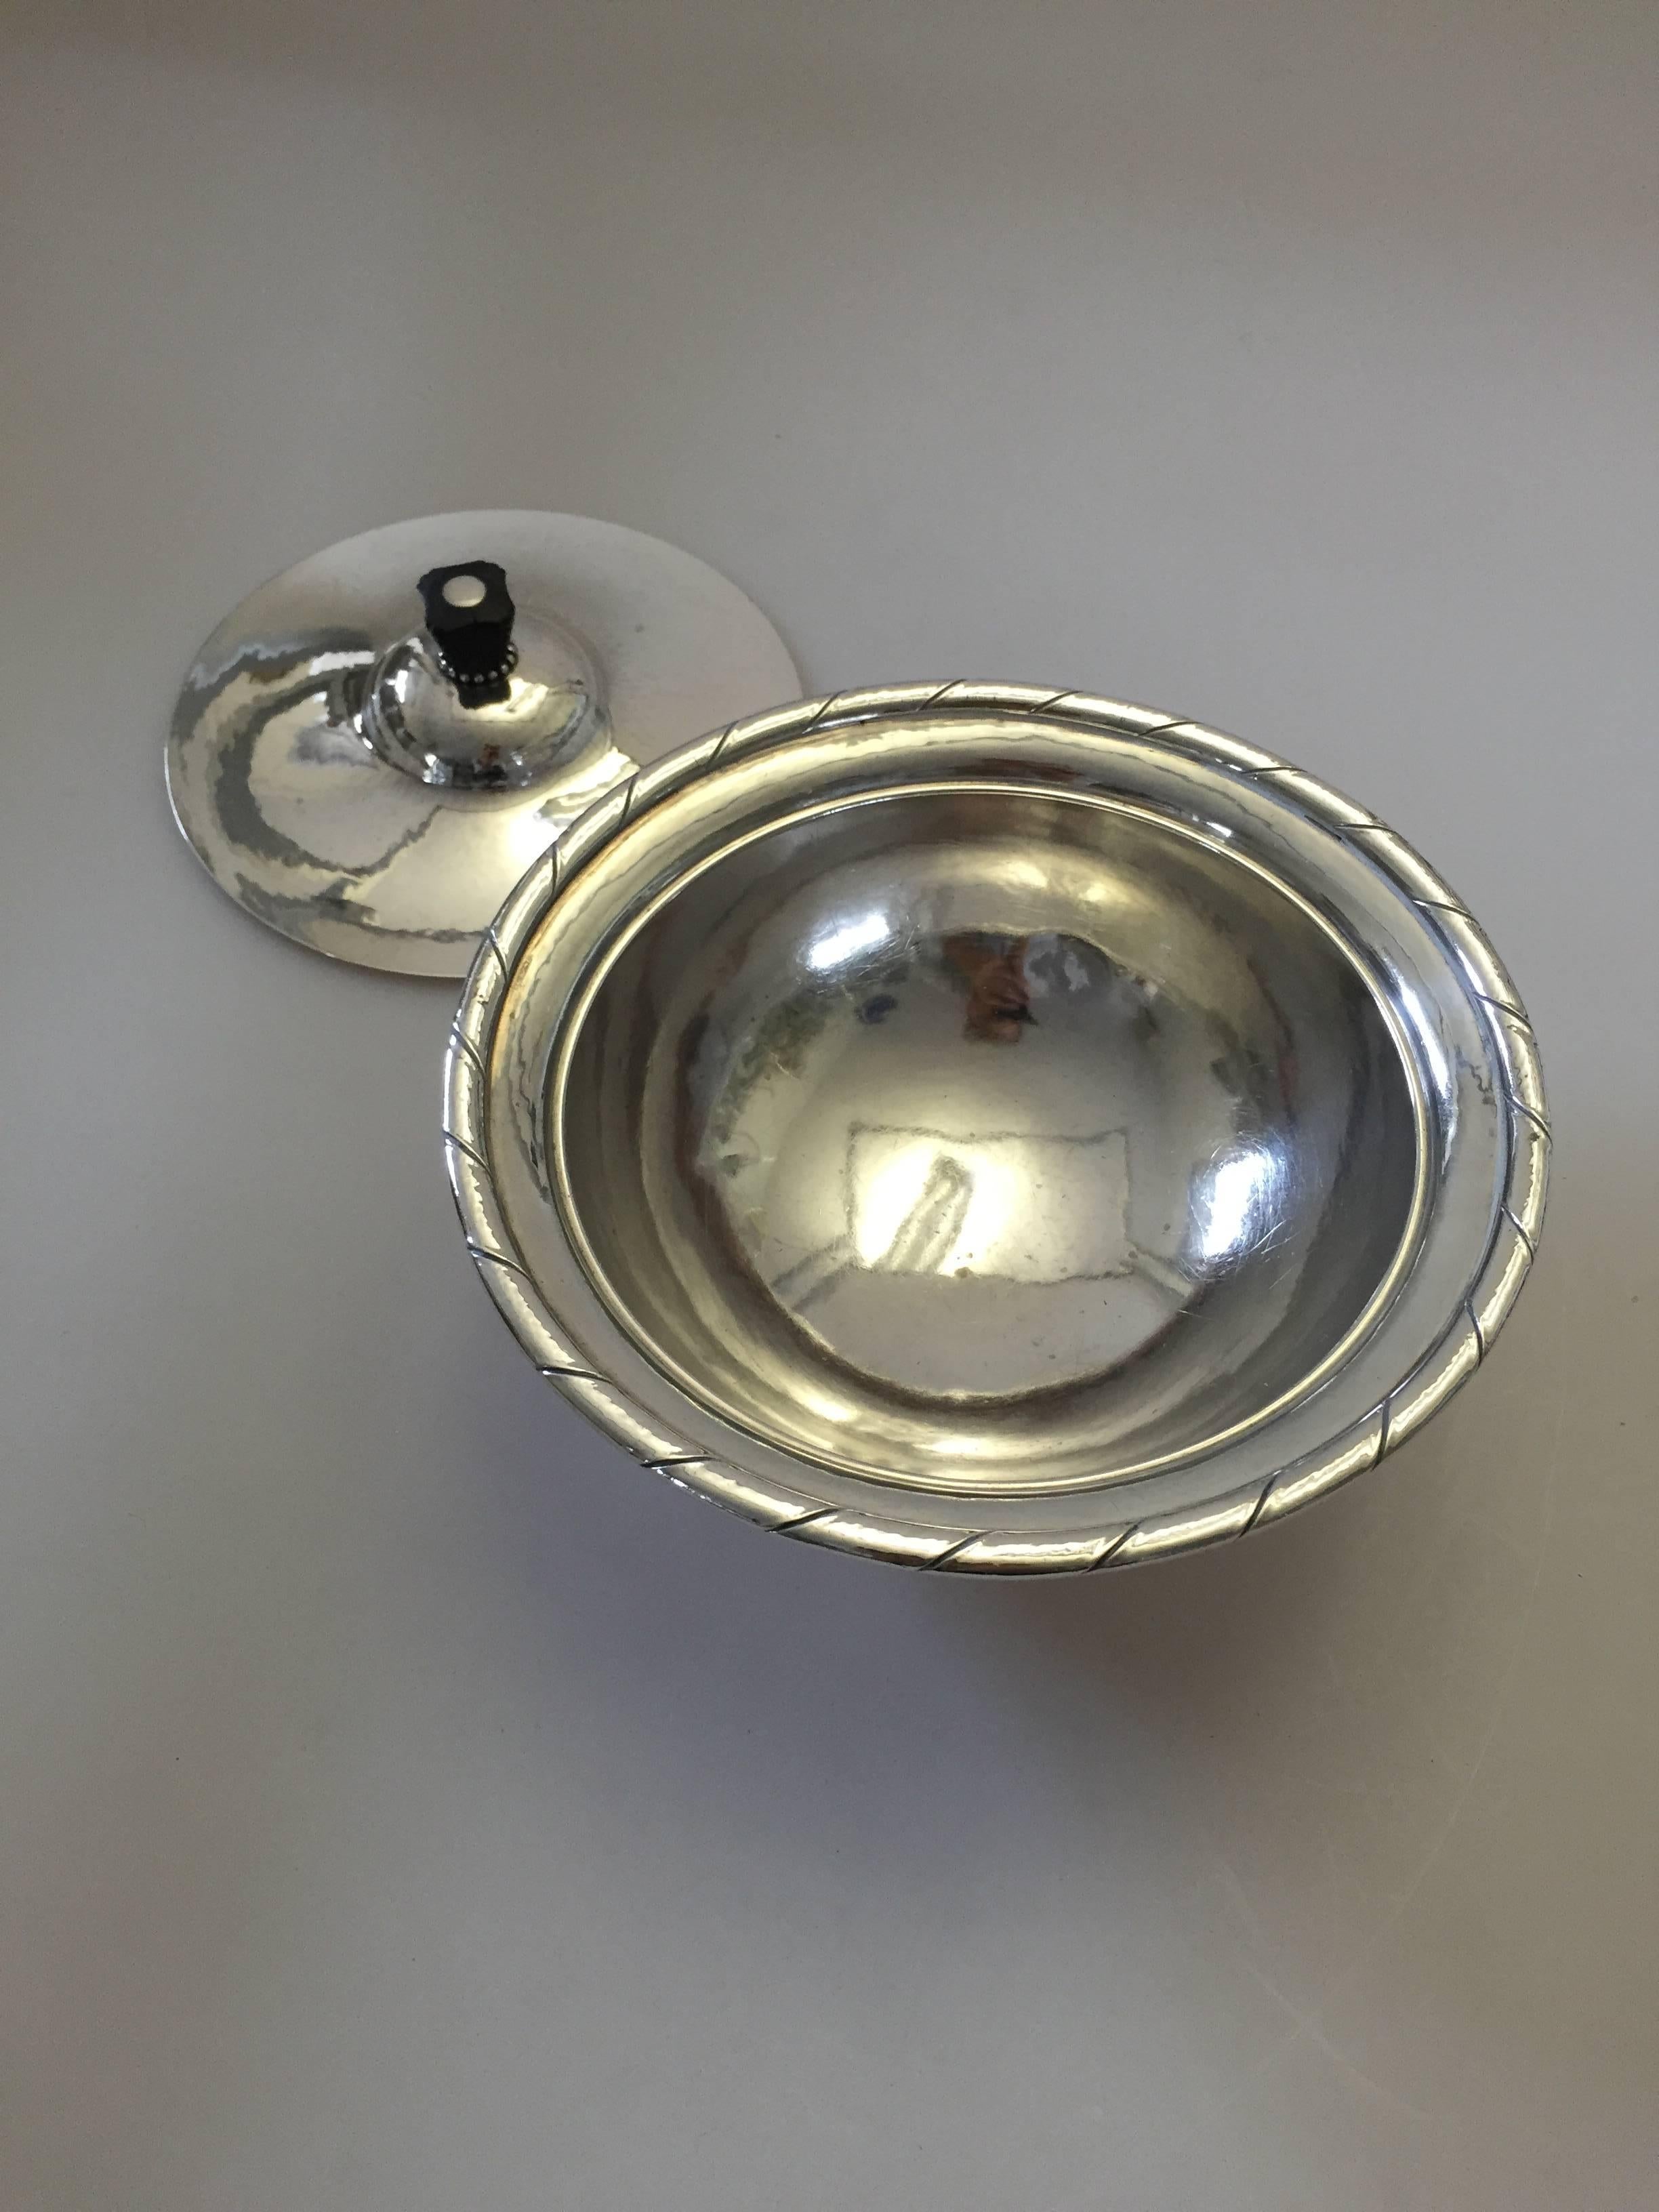 Georg Jensen sterling silver bowl with lid #88B. With marks post 1945. 

Georg Jensen (1866-1935) opened his small silver atelier in Copenhagen, Denmark in 1904. By 1935 the year of his death, he had received world acclaim and was hailed in the